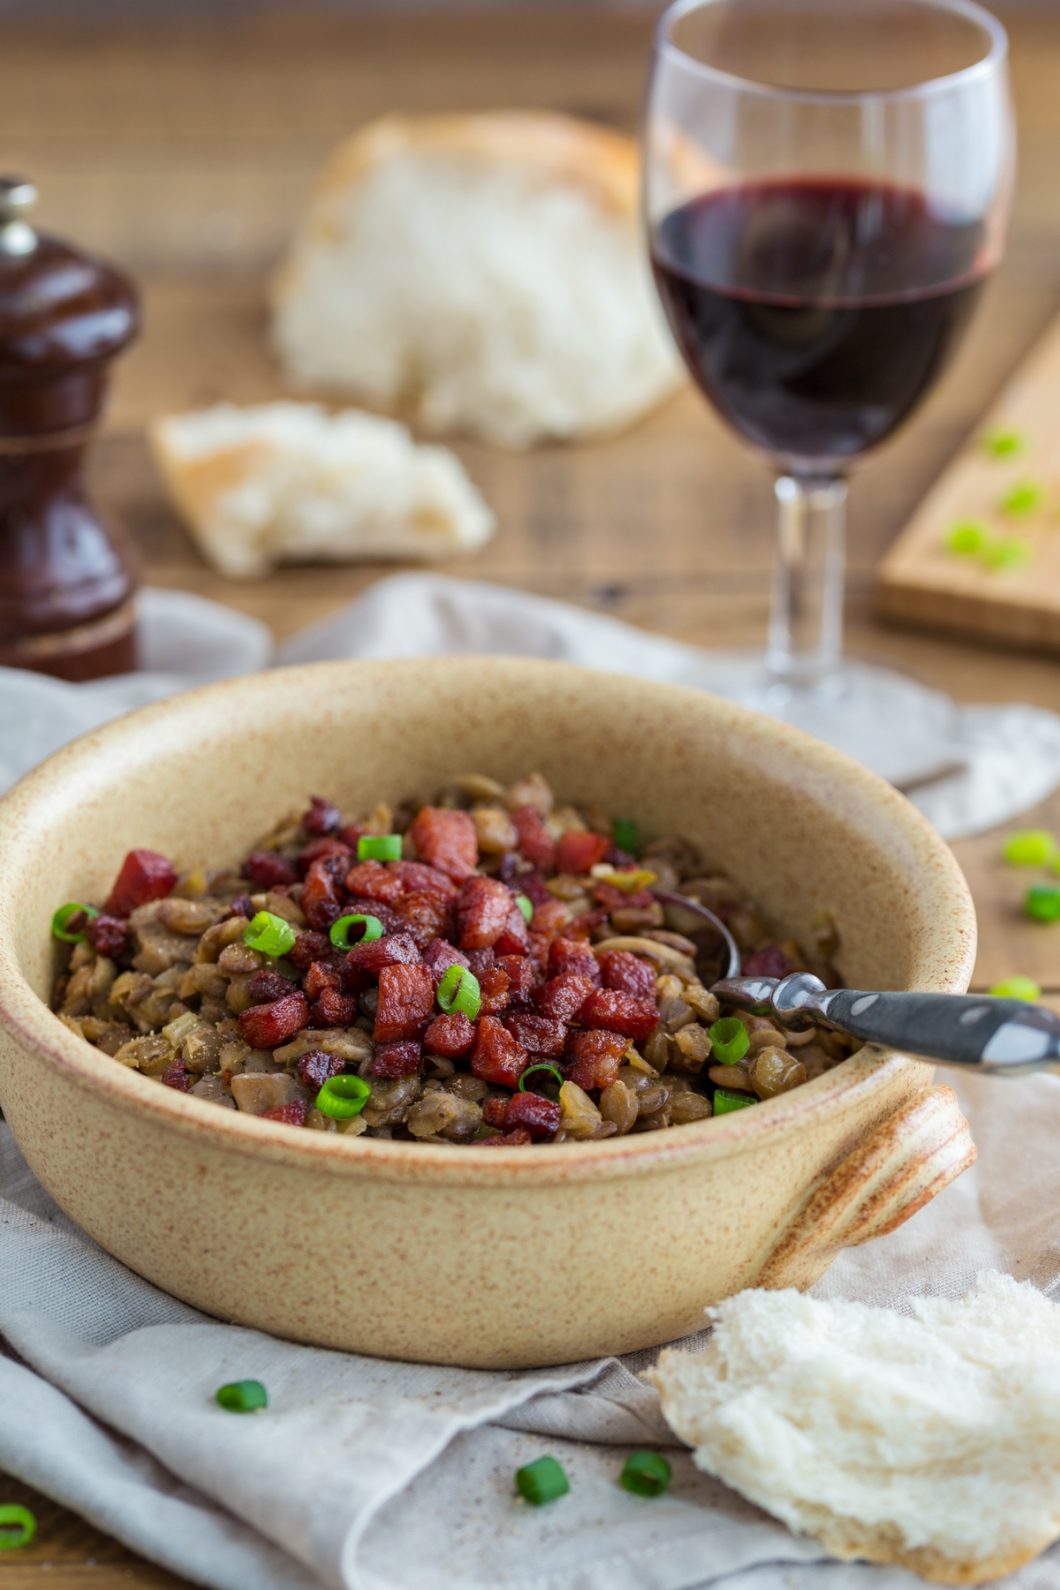 Lentil stew with mushrooms and crispy bacon served with fresh bread and red wine.